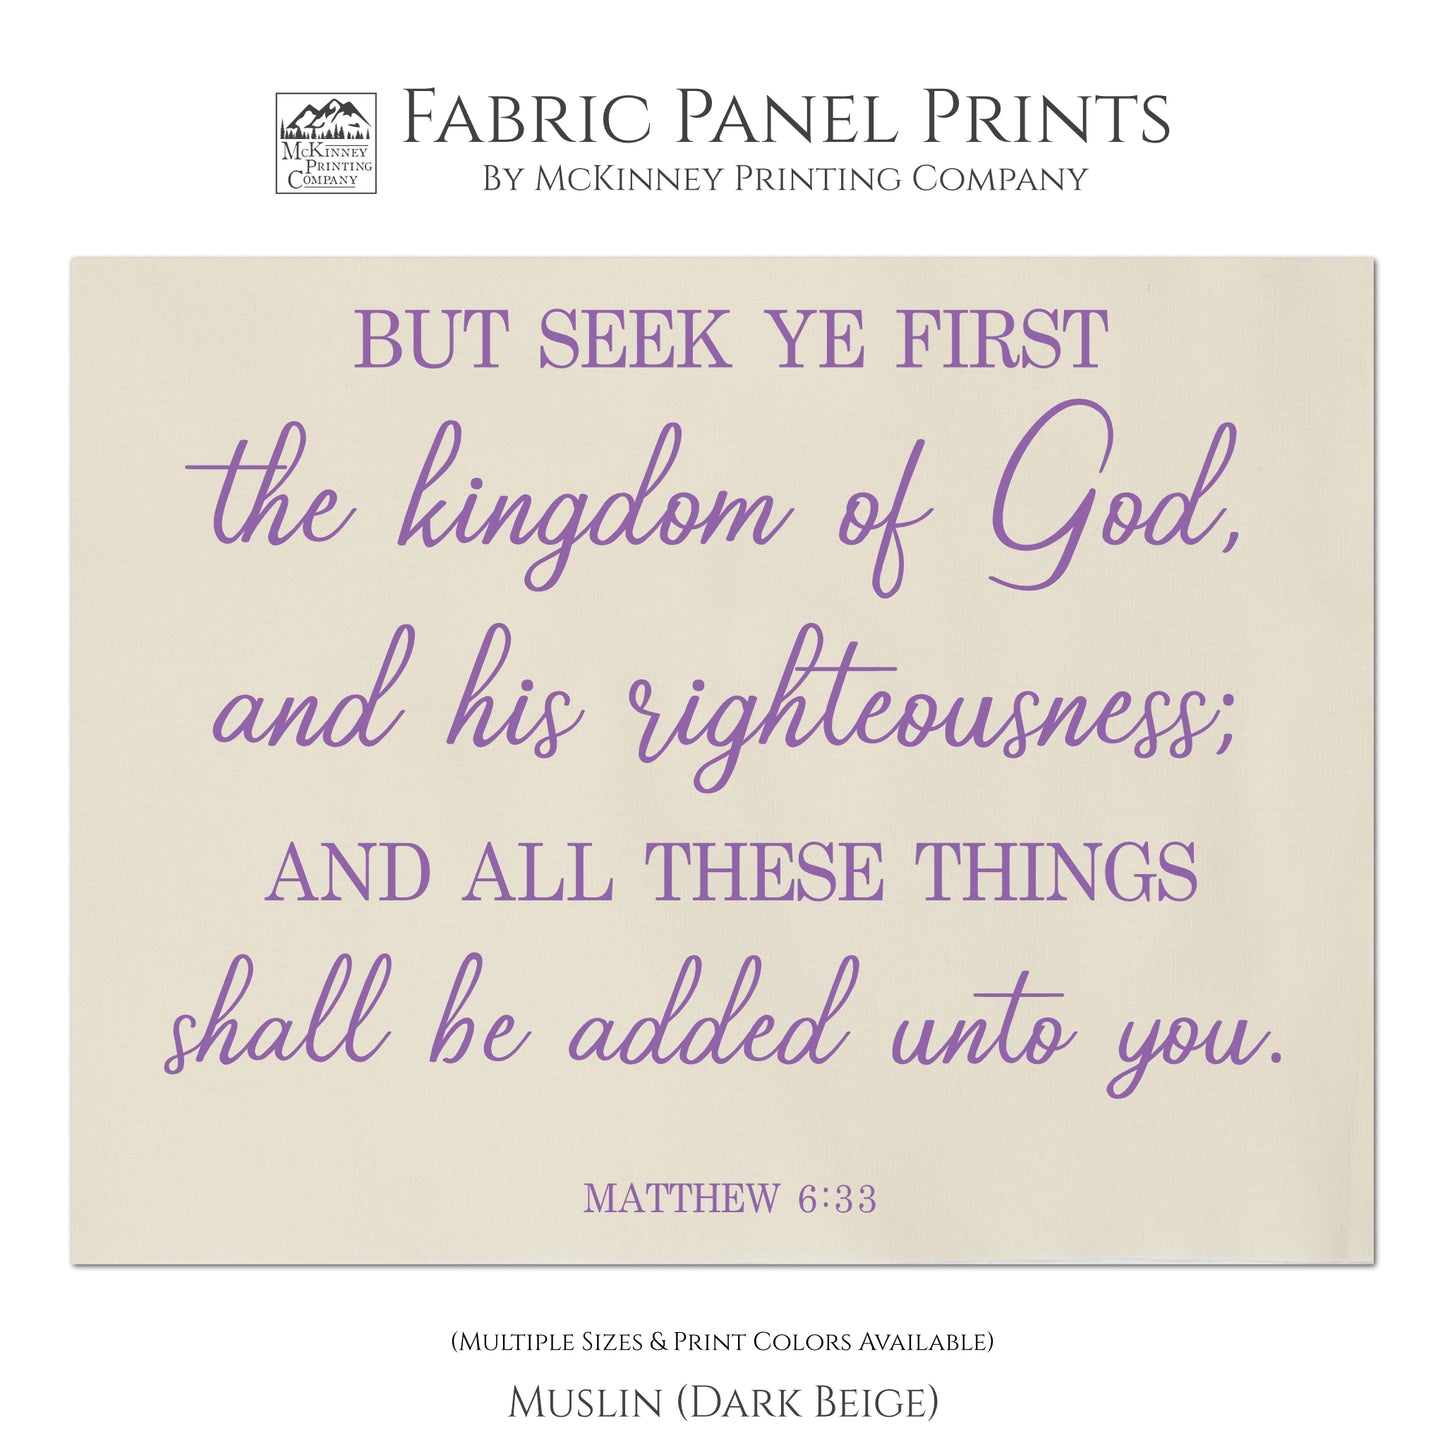 But seek ye first the kingdom of God, and his righteousness; and all these things shall be added unto you. Matthew 6 33, Scripture Fabric, Quilt Block Print, Fabric Panel - Muslin